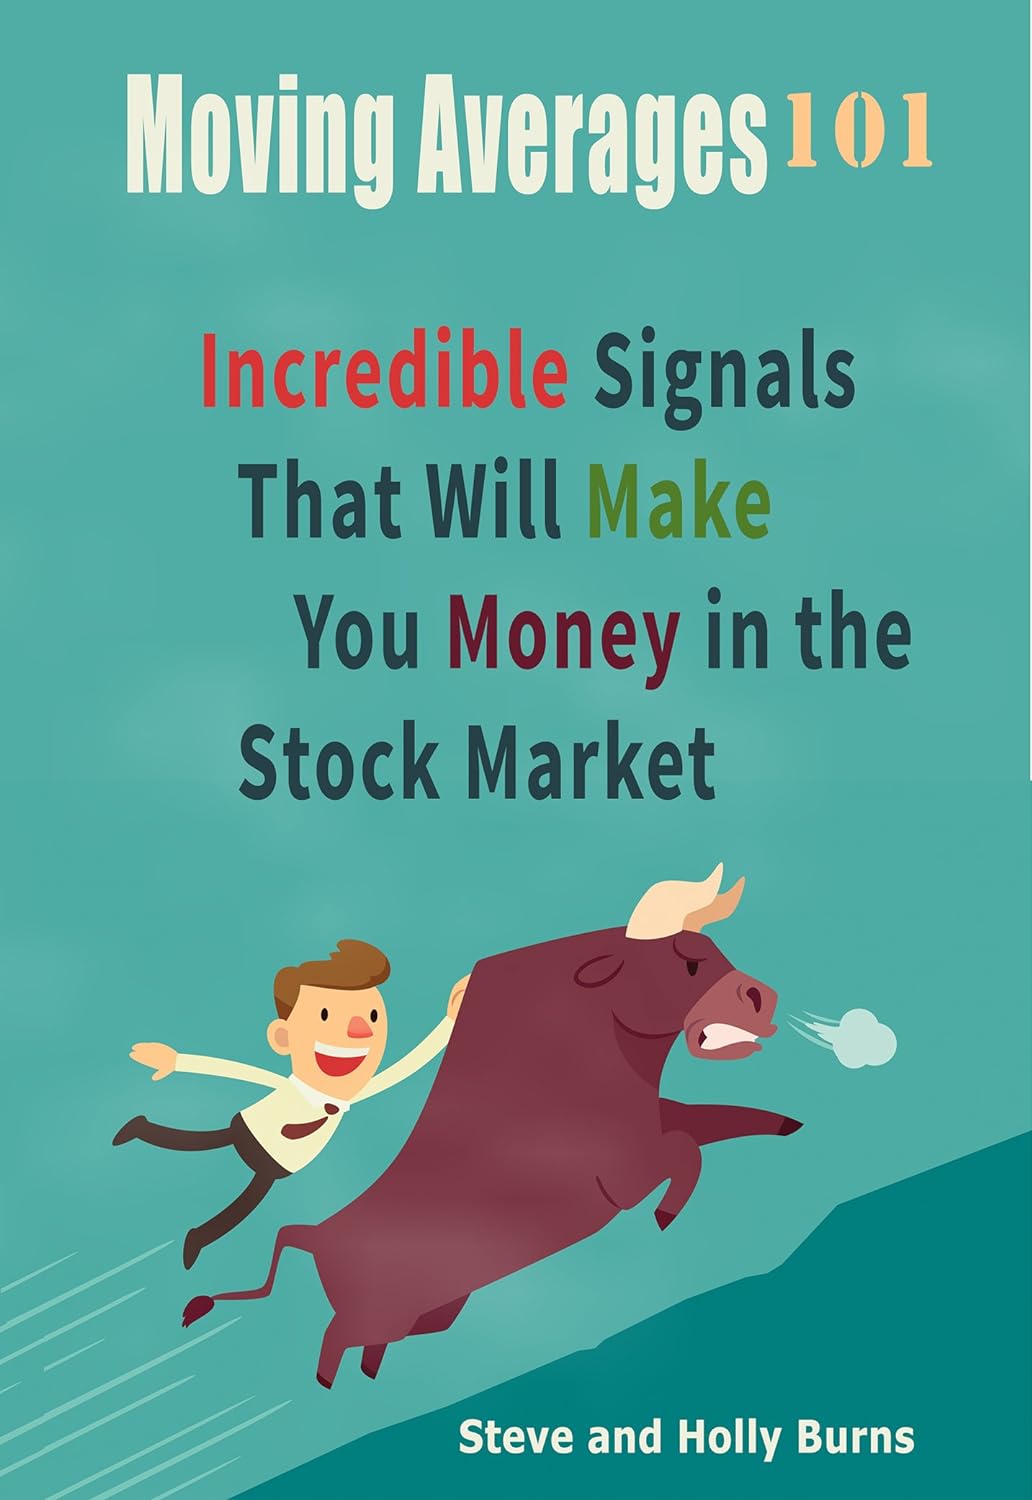 Moving Averages 101: Incredible Signals That Will Make You Money in the Stock Market